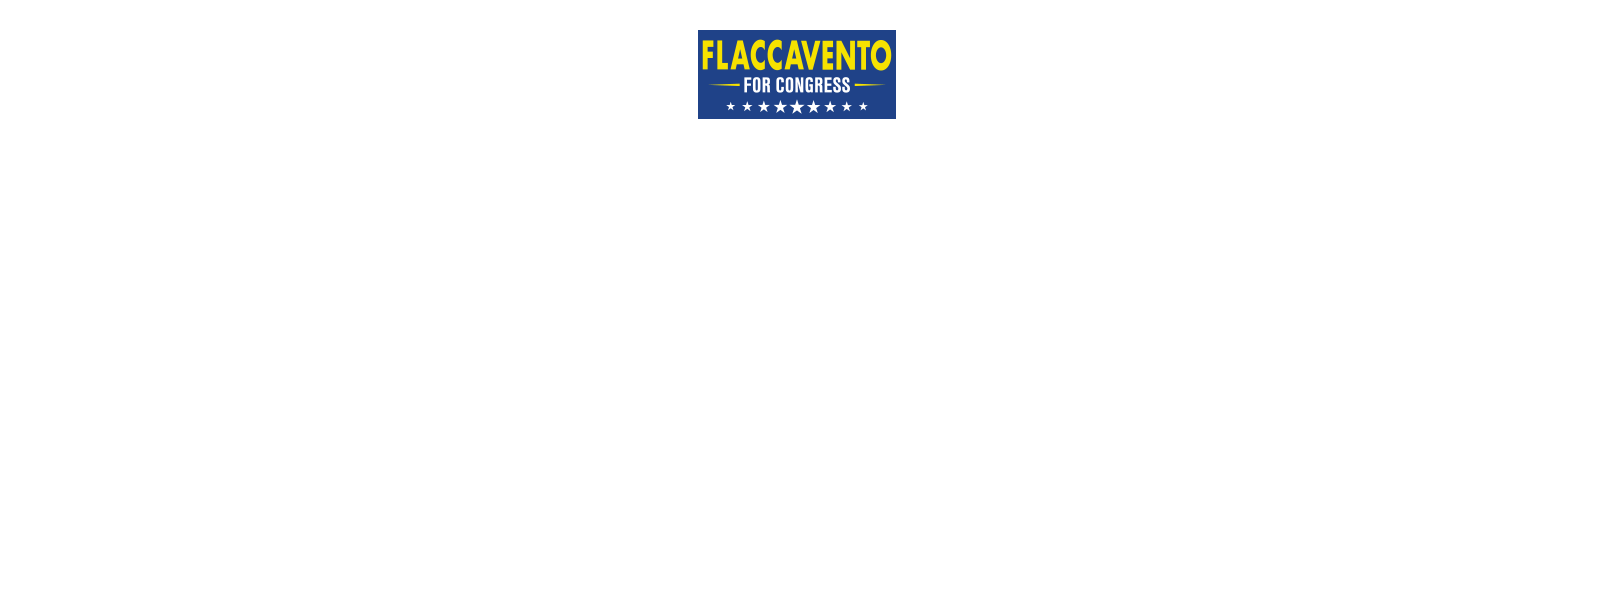 Testimonial from Flaccavento campaign